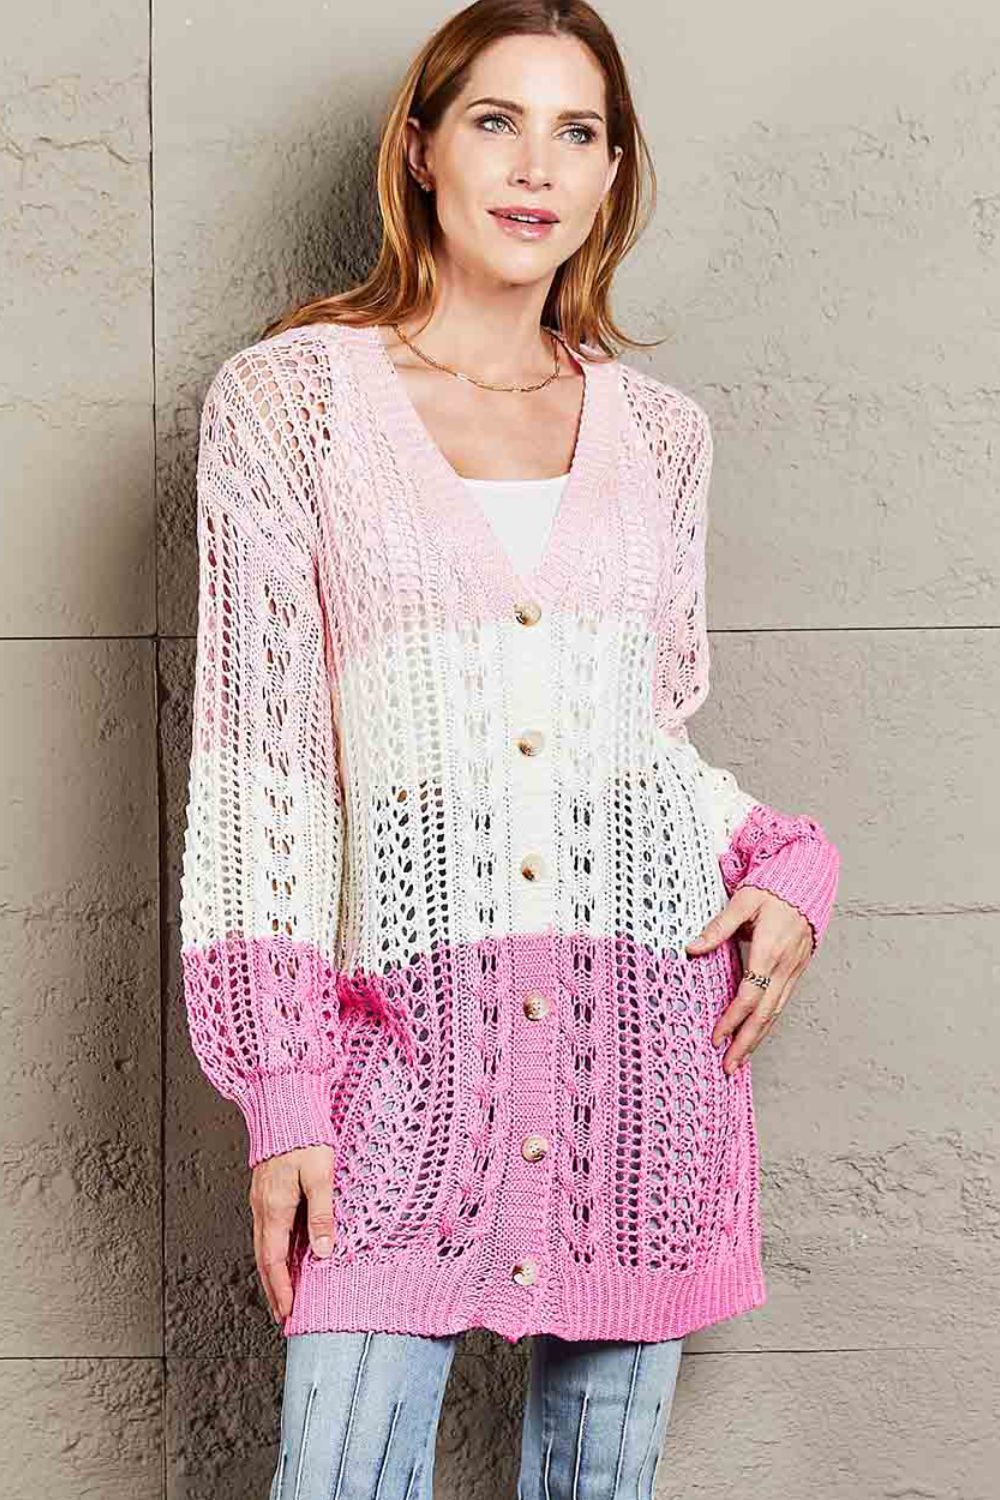 Openwork Ribbed Cuff Longline Cardigan - Women’s Clothing & Accessories - Shirts & Tops - 1 - 2024